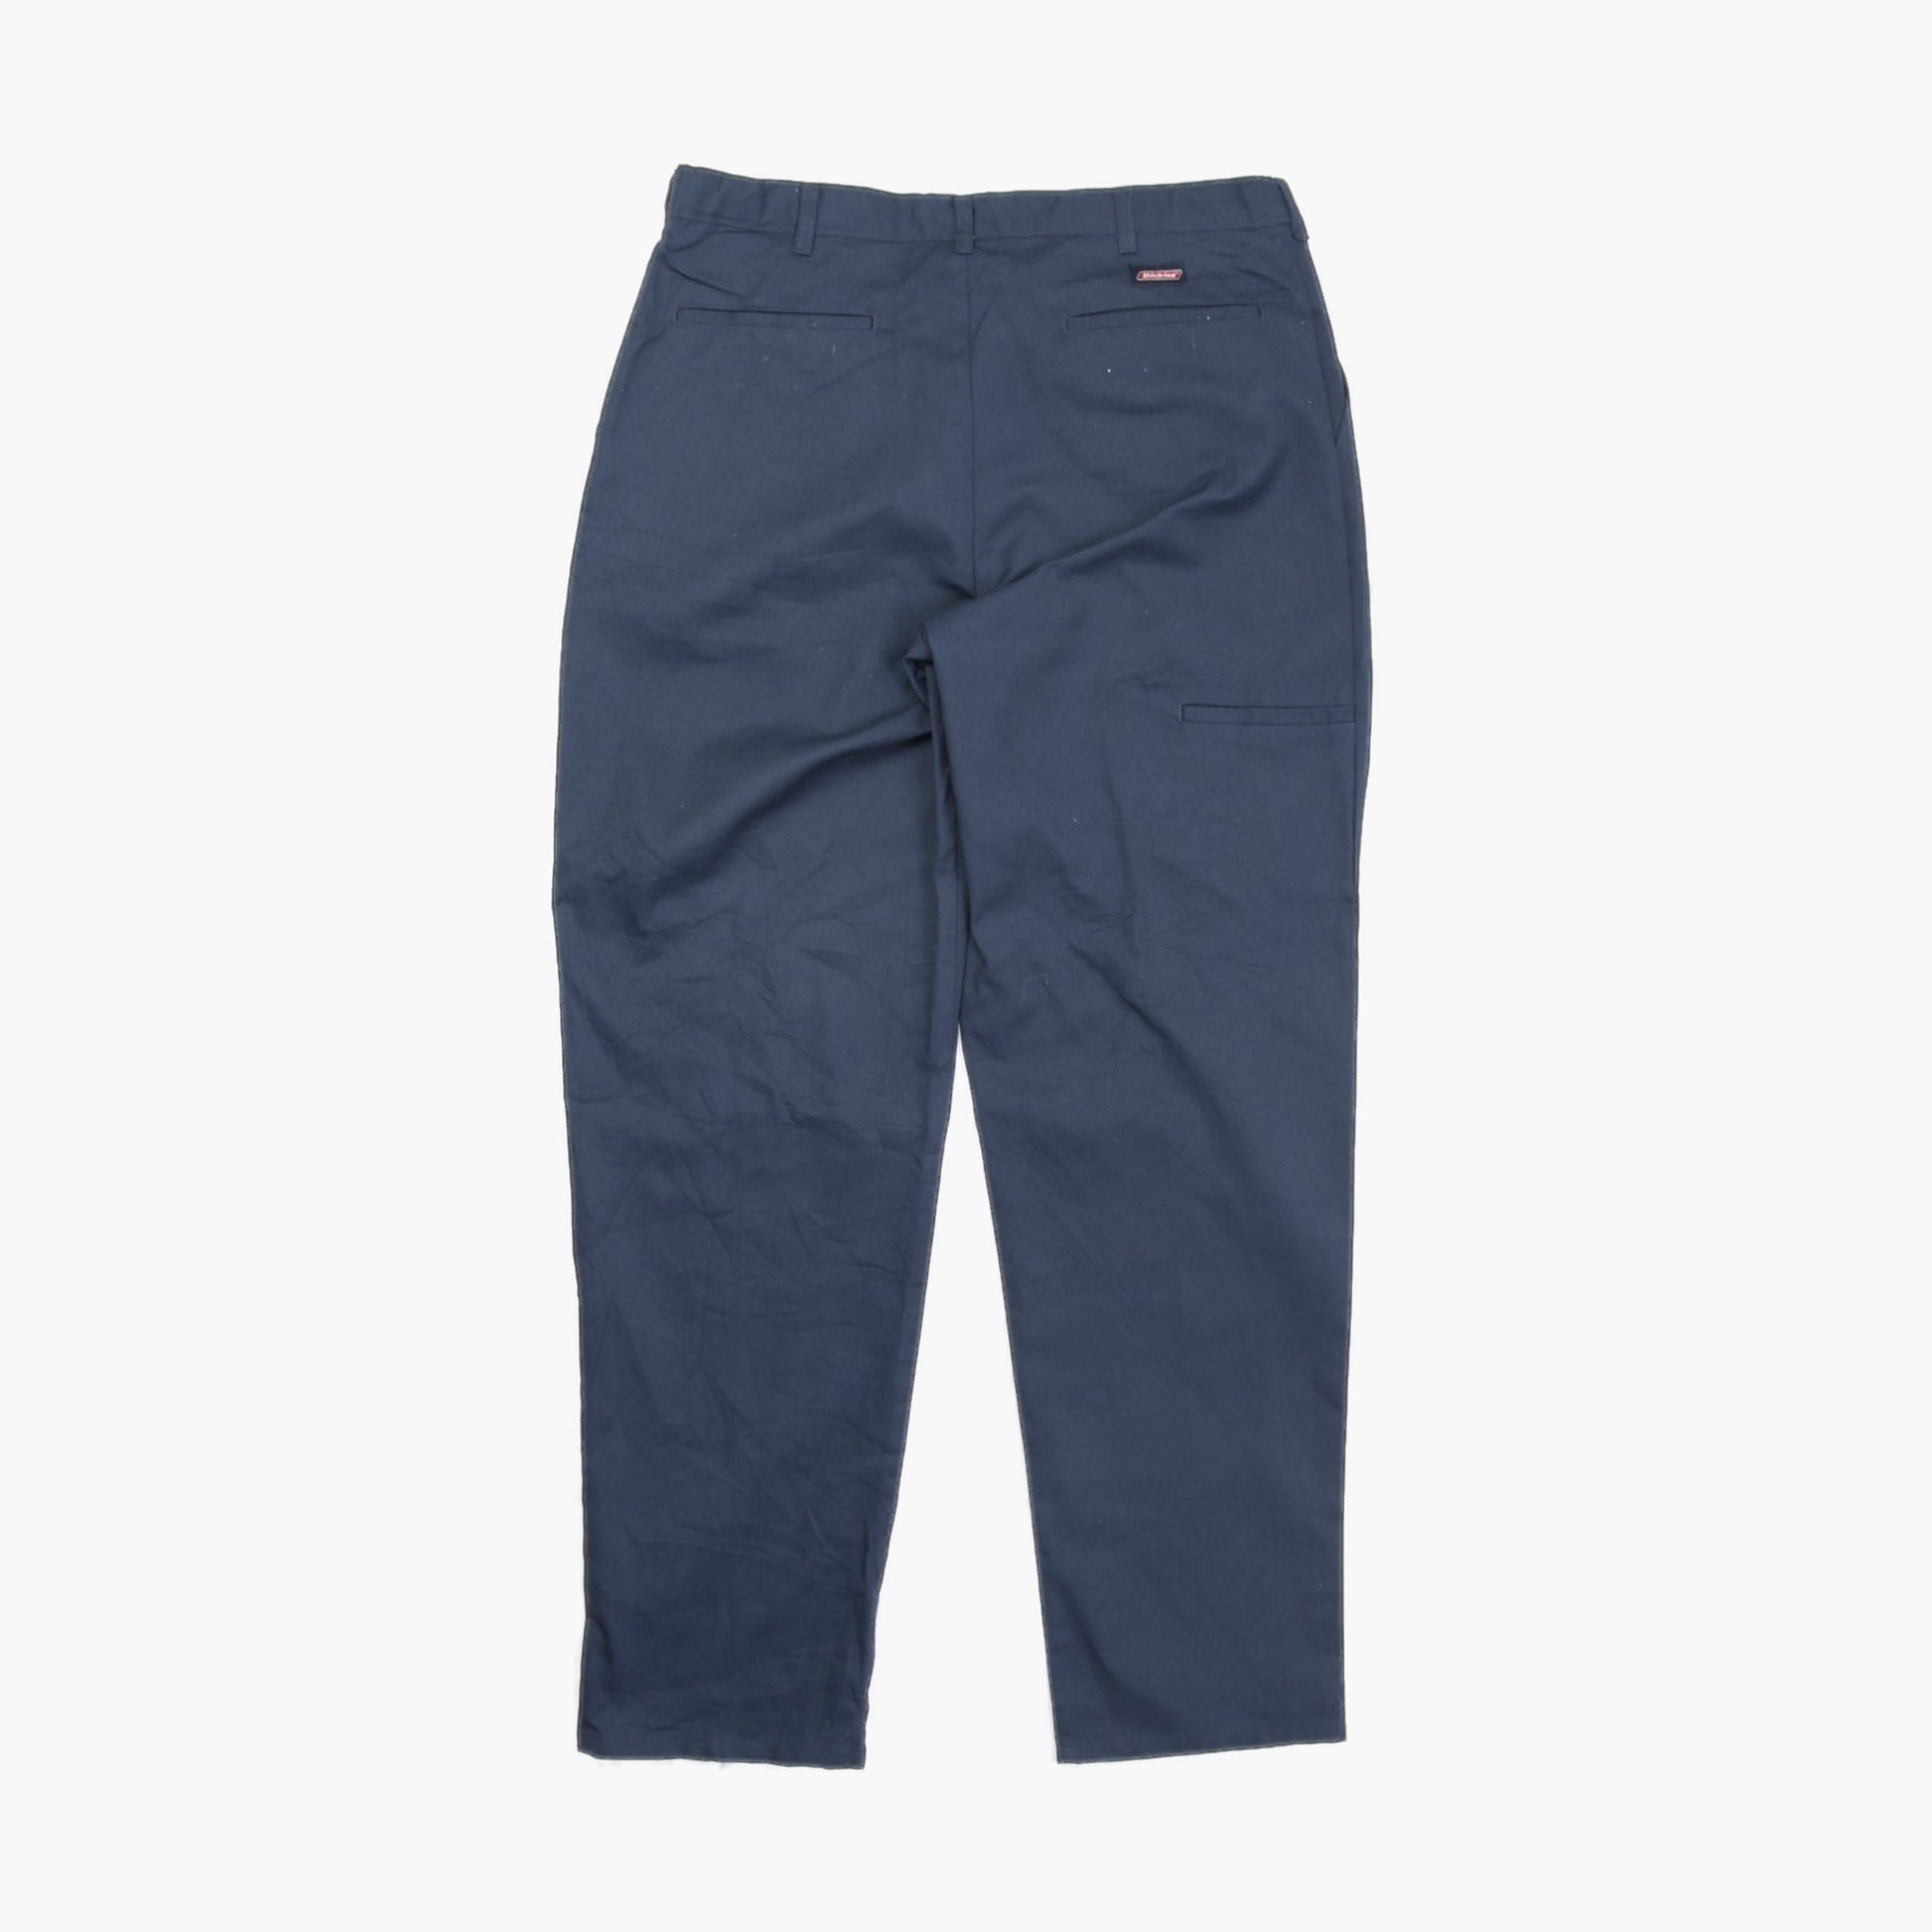 874 Work Trousers - Navy - 36/34